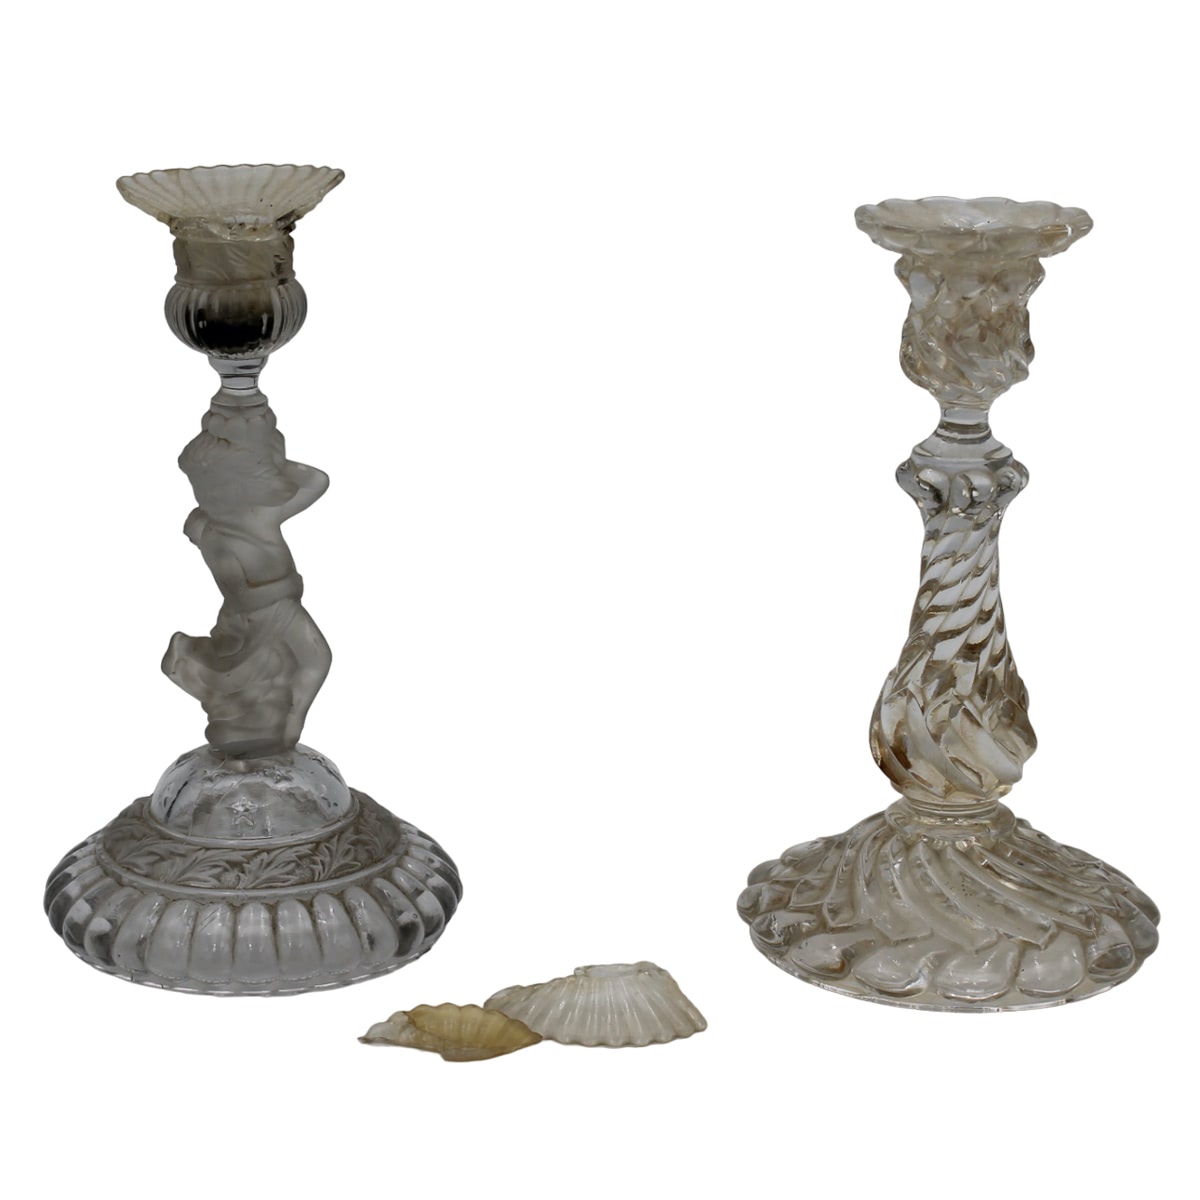 Due portacandele - Two candle holders